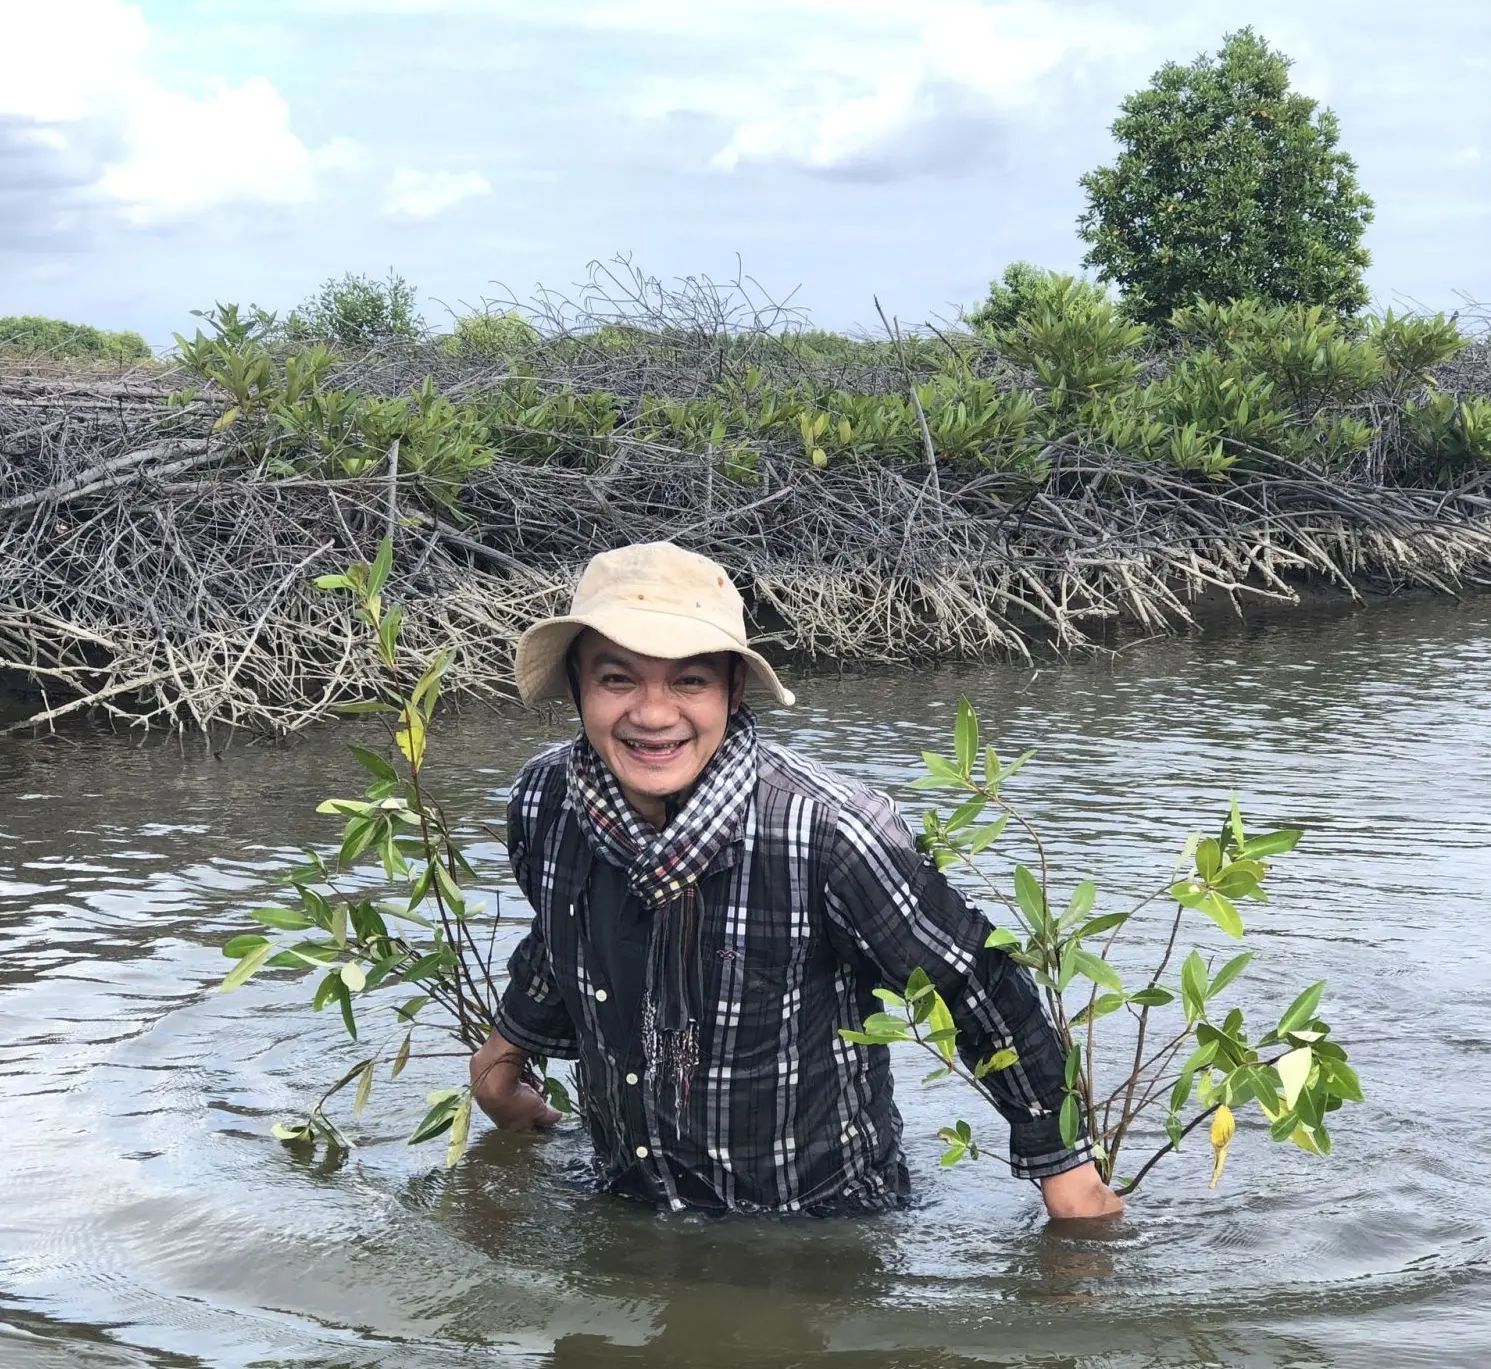 An IUCN staff joined the mangrove planting in Dat Moi Village, Ca Mau Province